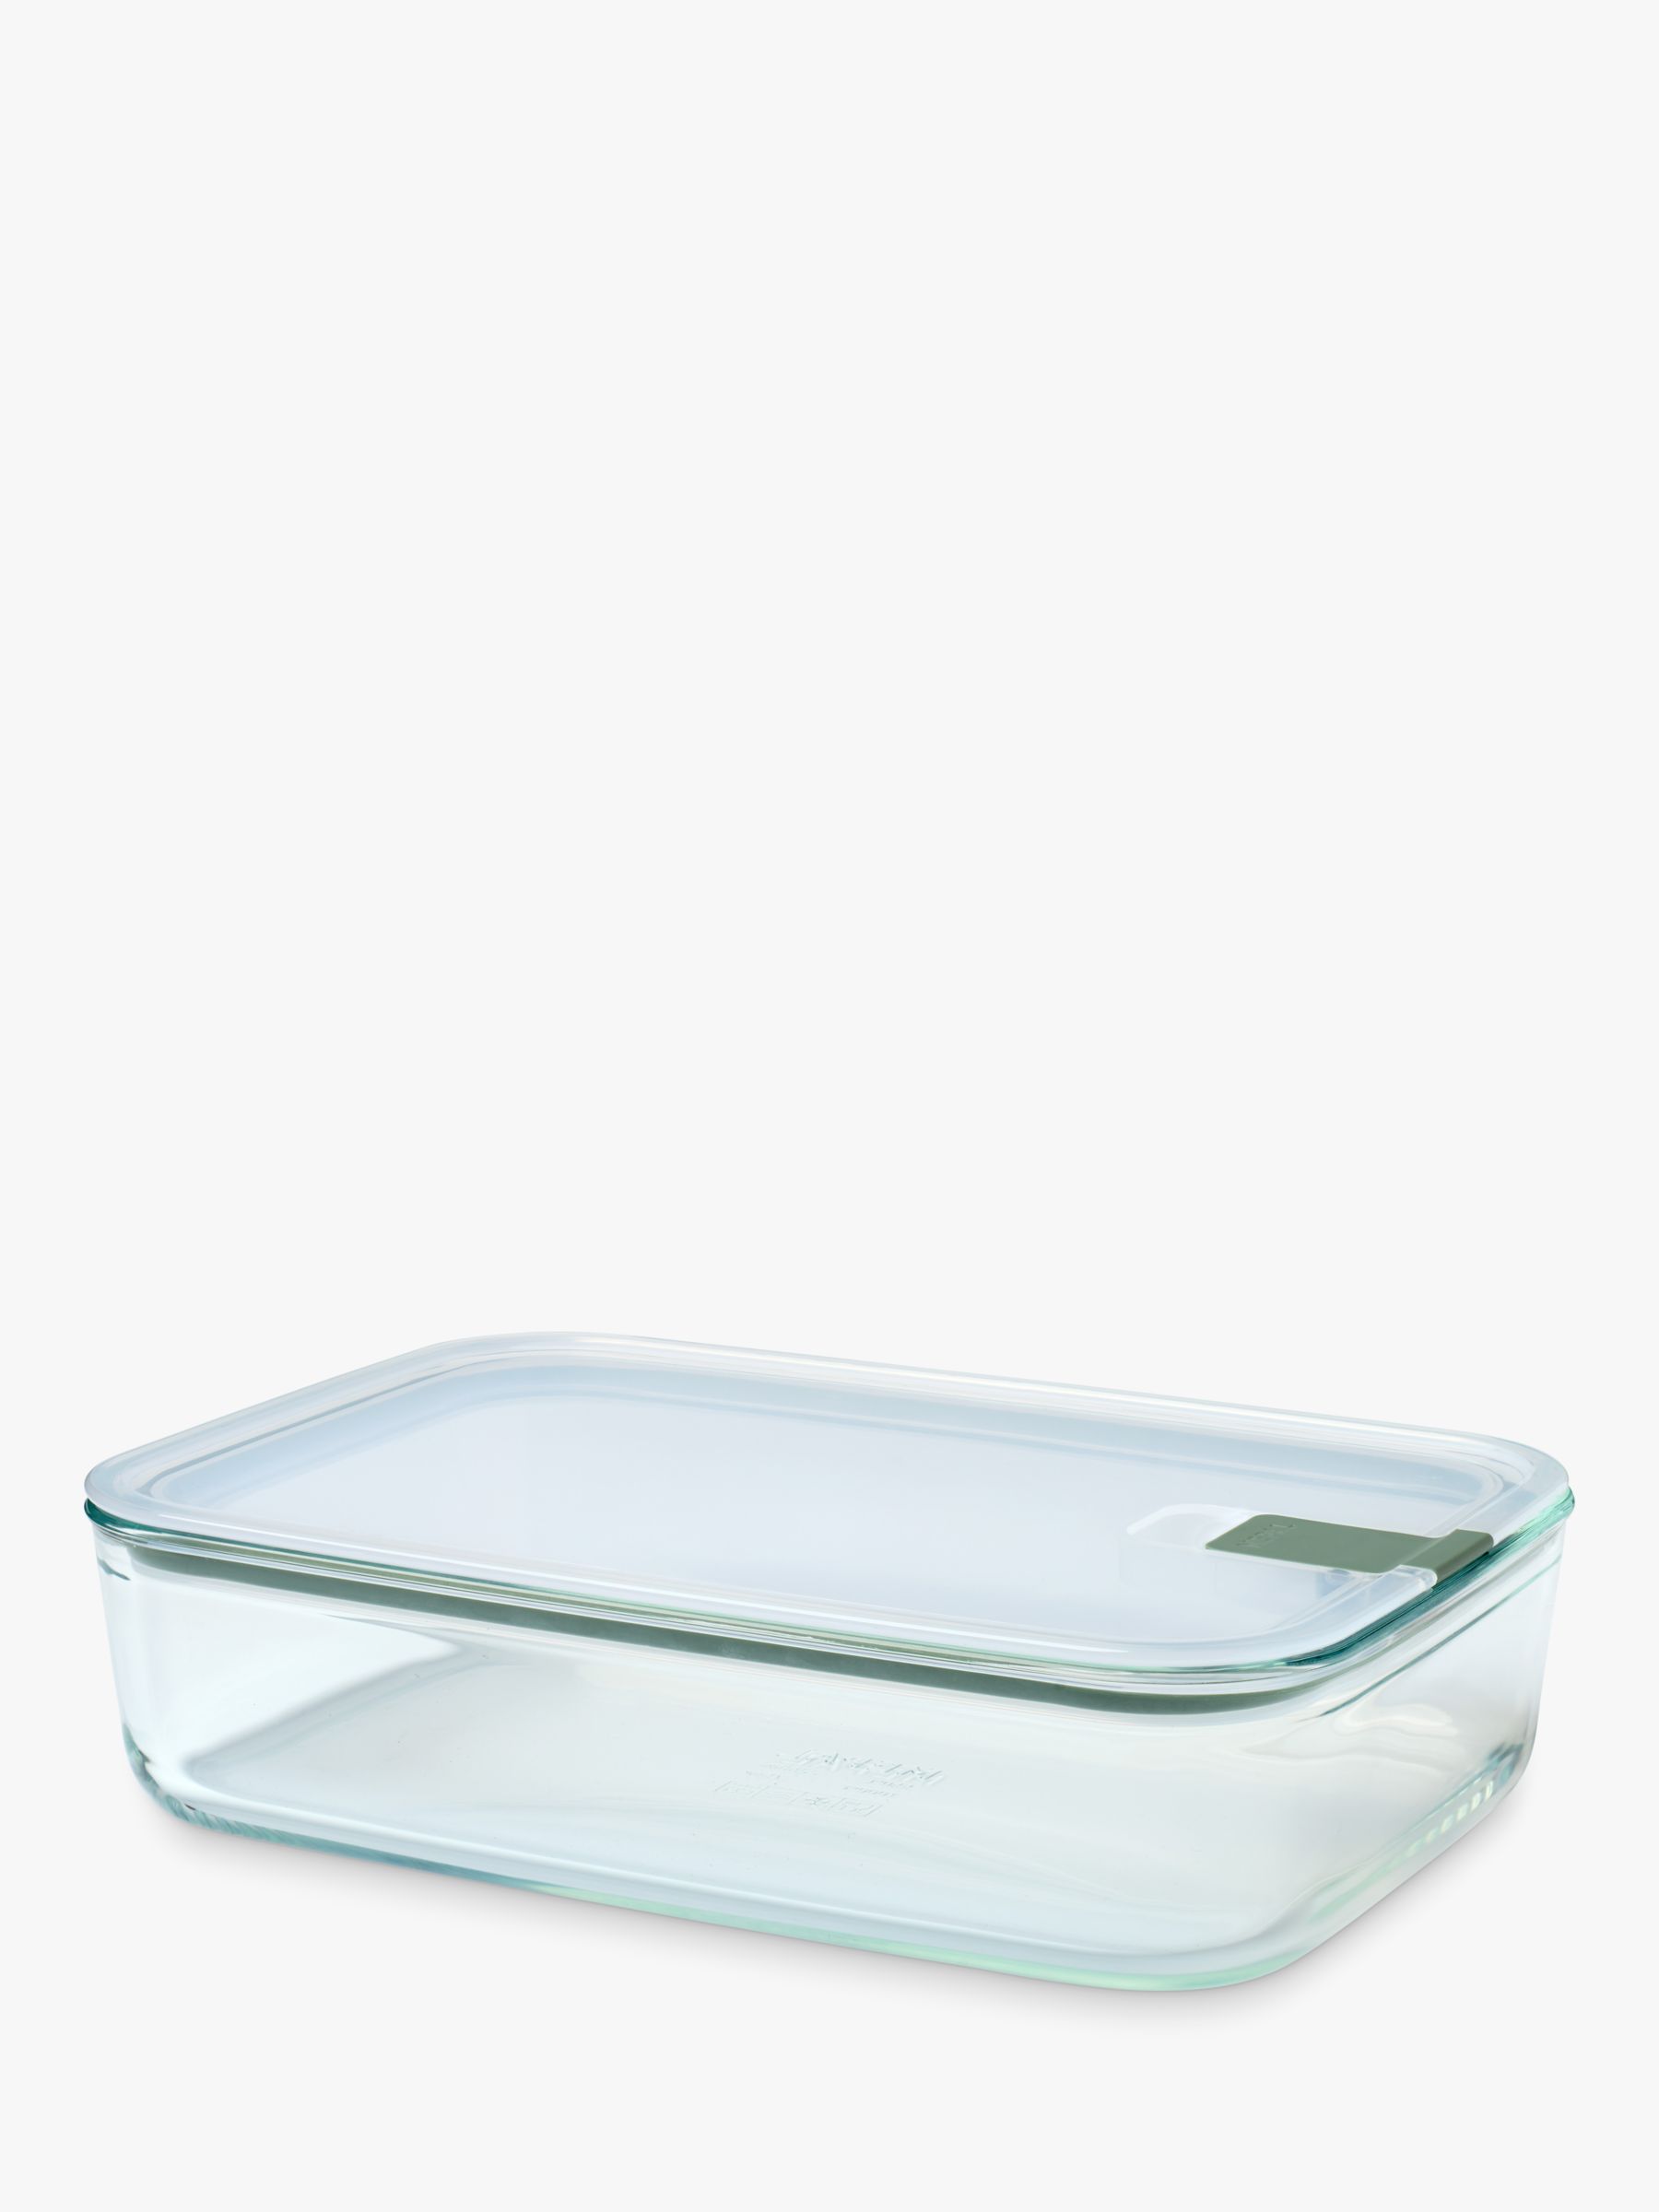 Pyrex Baking Dish, Deep Glass, 2.6 qt, with Lid